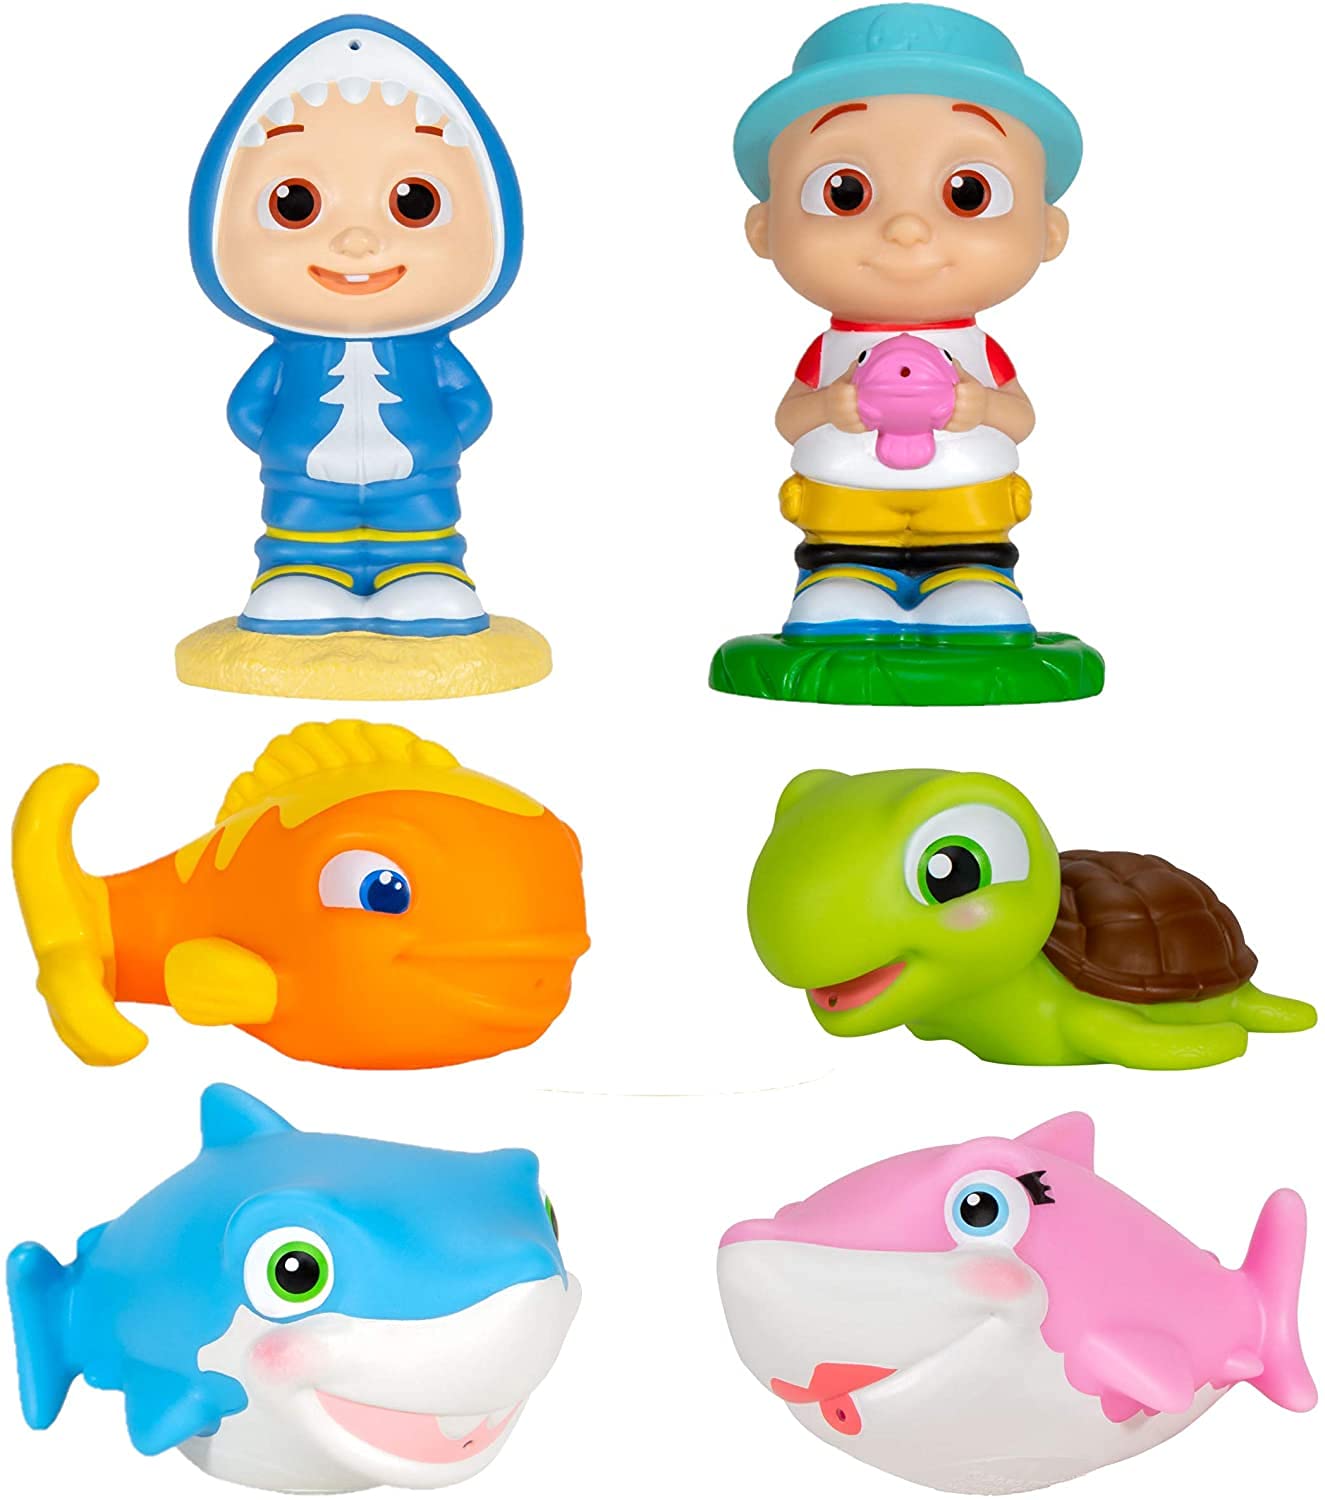 CoComelon Bath Squirter Water Toys 6 Pack - Officially Licensed - Featuring JJ, Sharks, Turtle & Goldfish - Add to Bath Time or Pools! Water Playset Gift for Toddlers, Preschoolers & Kids - Ages 1-3